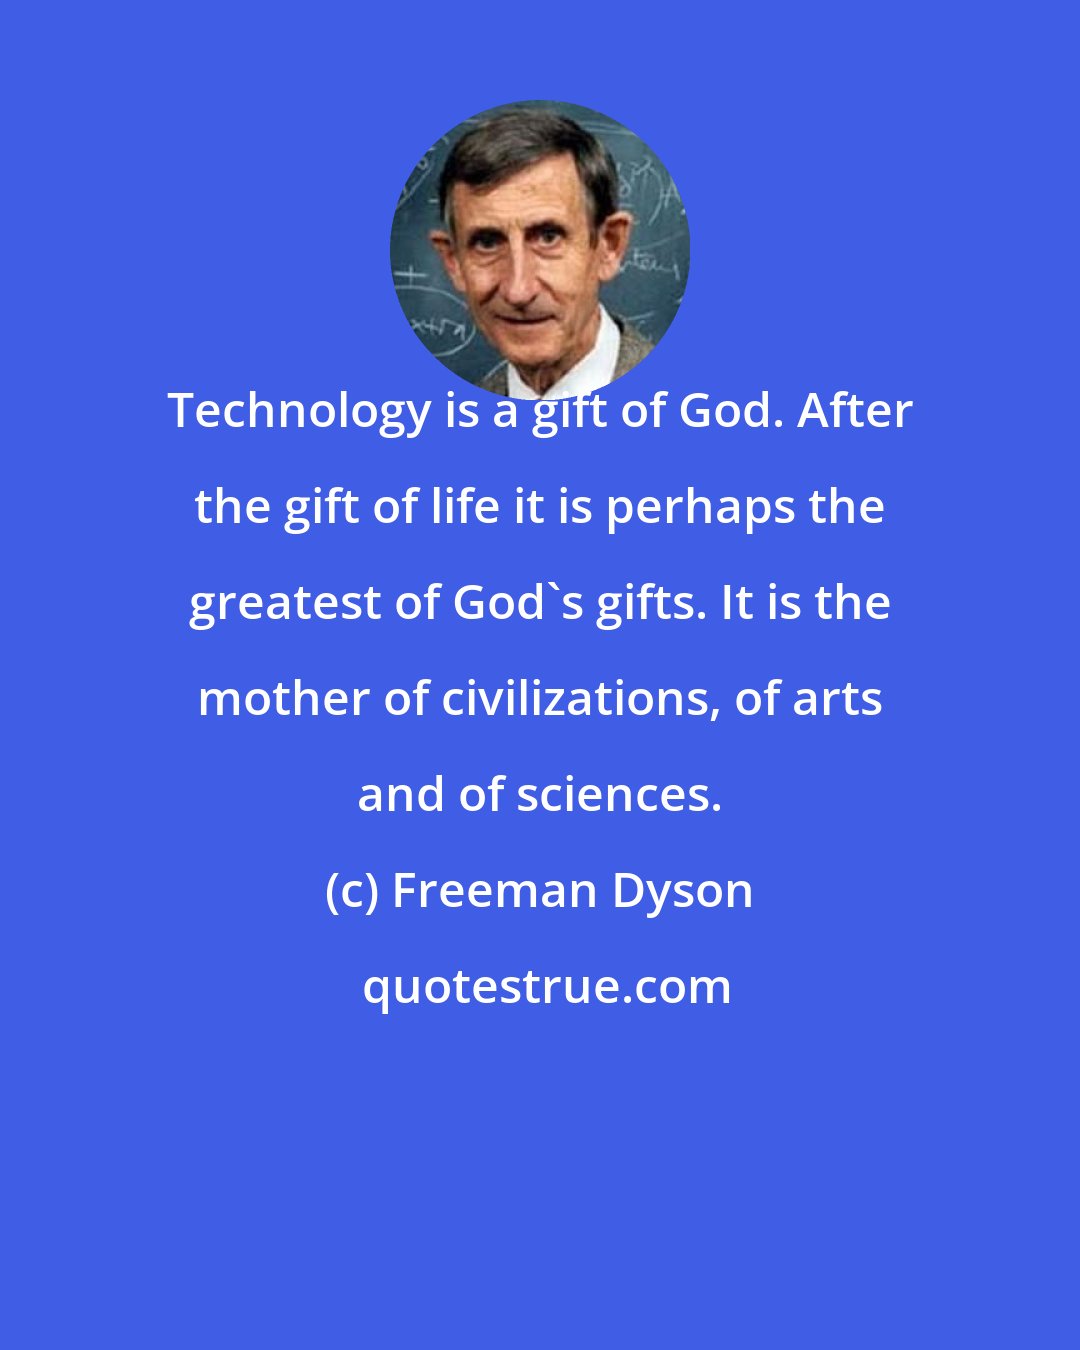 Freeman Dyson: Technology is a gift of God. After the gift of life it is perhaps the greatest of God's gifts. It is the mother of civilizations, of arts and of sciences.